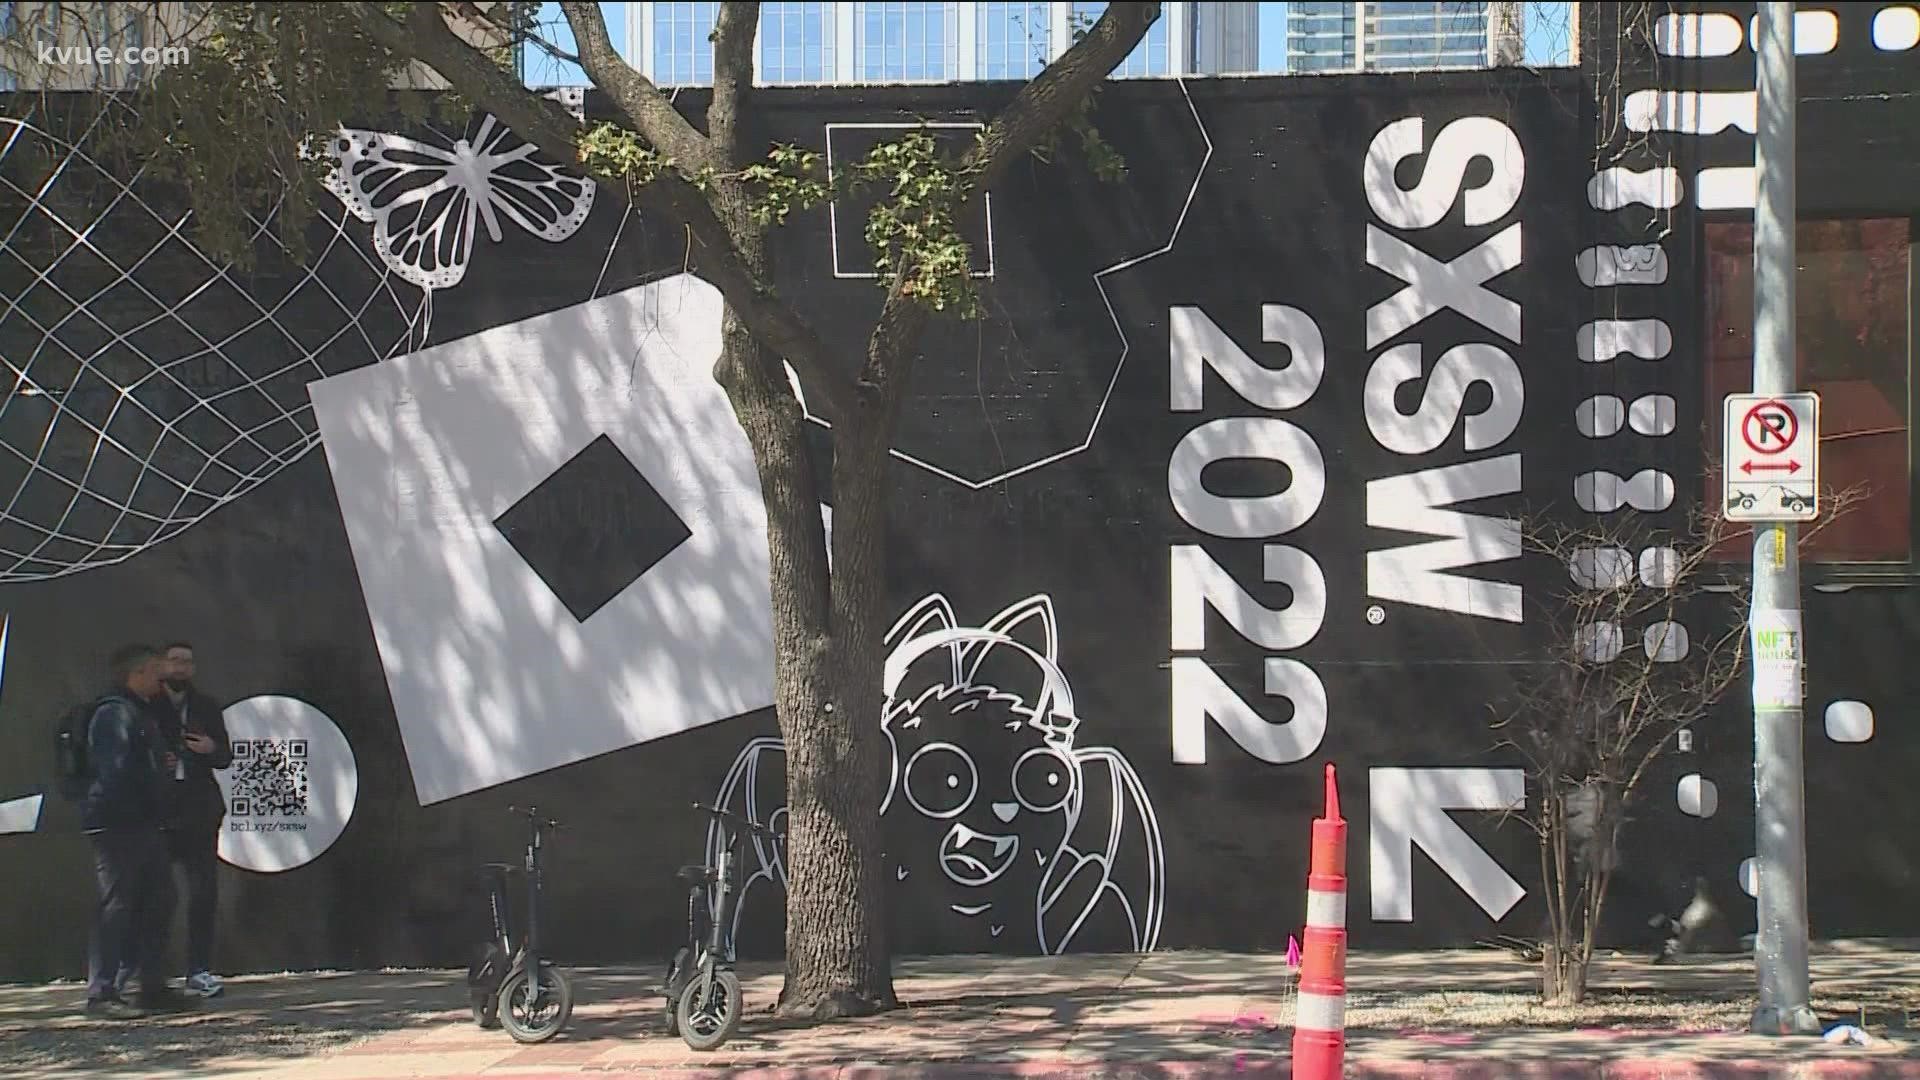 More people are in town for South by Southwest this week as the music festival has officially begun. KVUE's Conner Board has a mid-fest update.